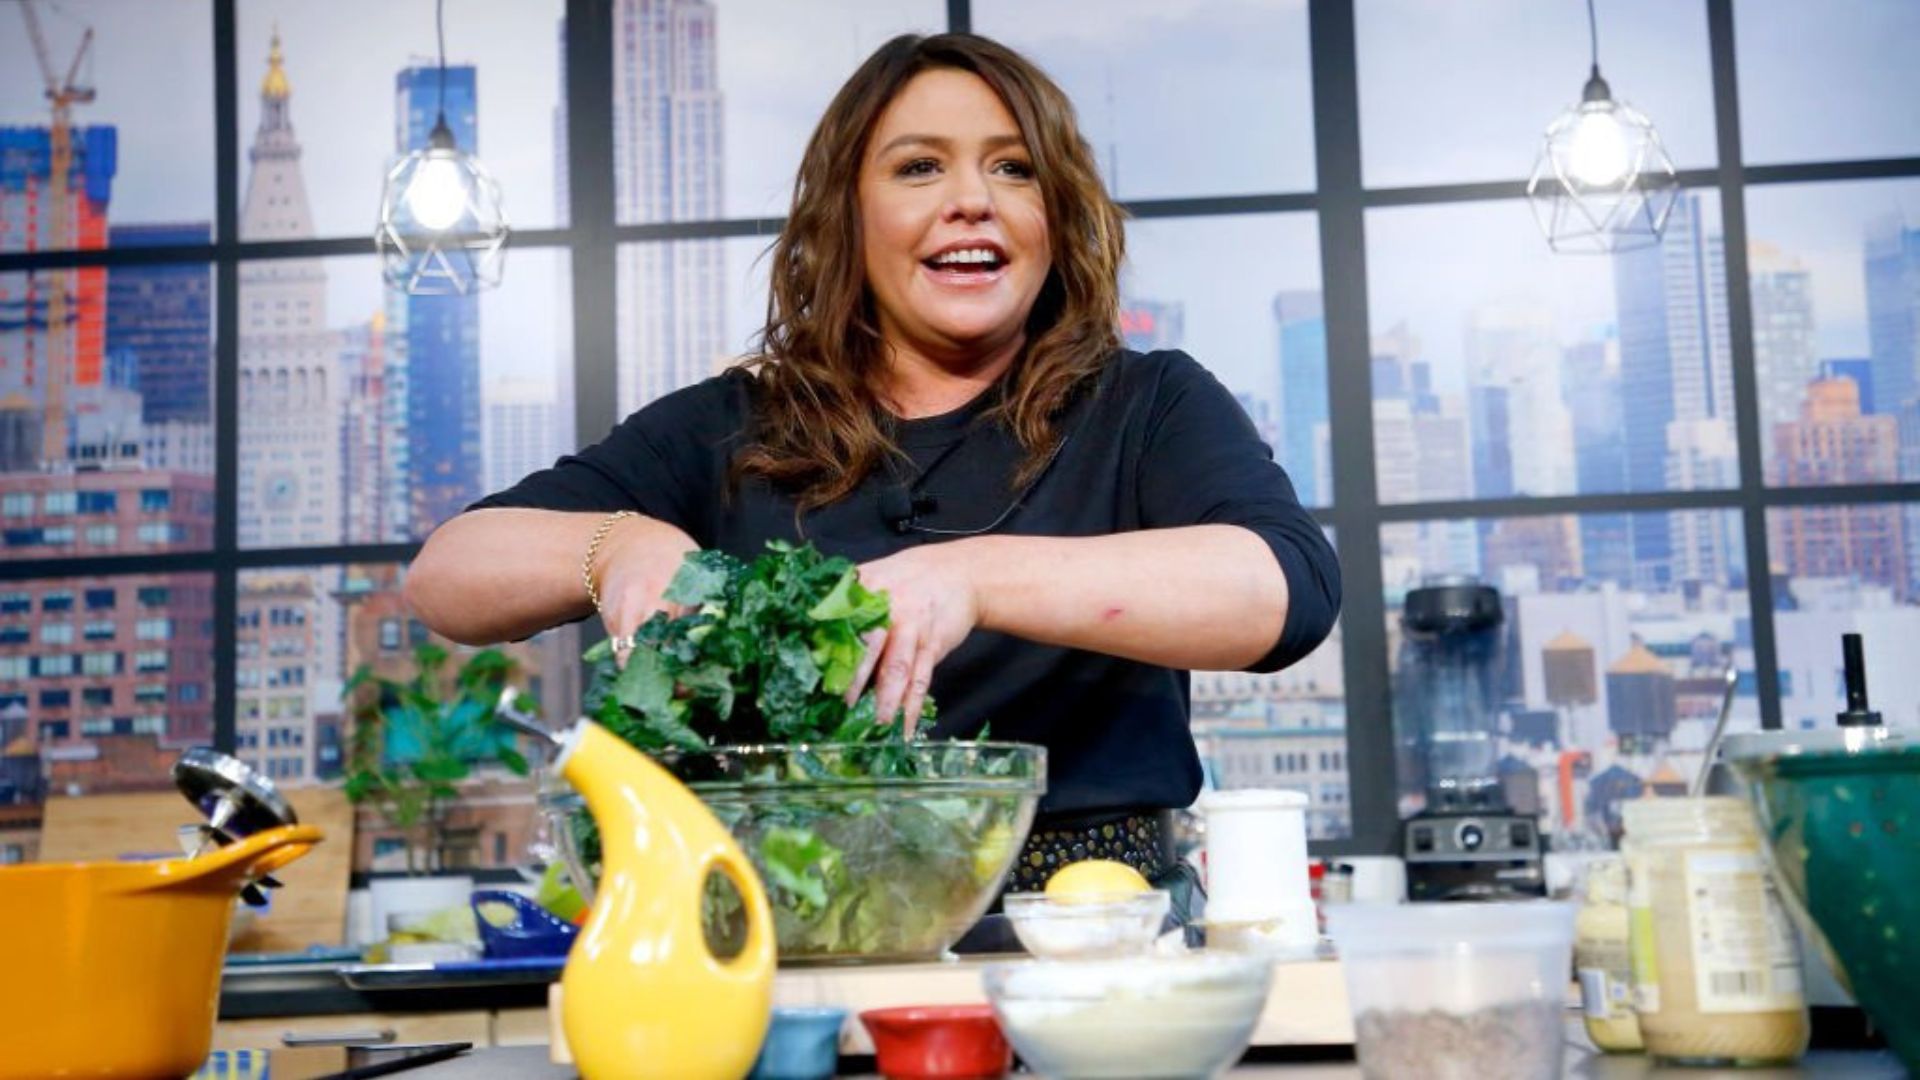 The Celebrity Chef Rachael Ray's Weight Loss